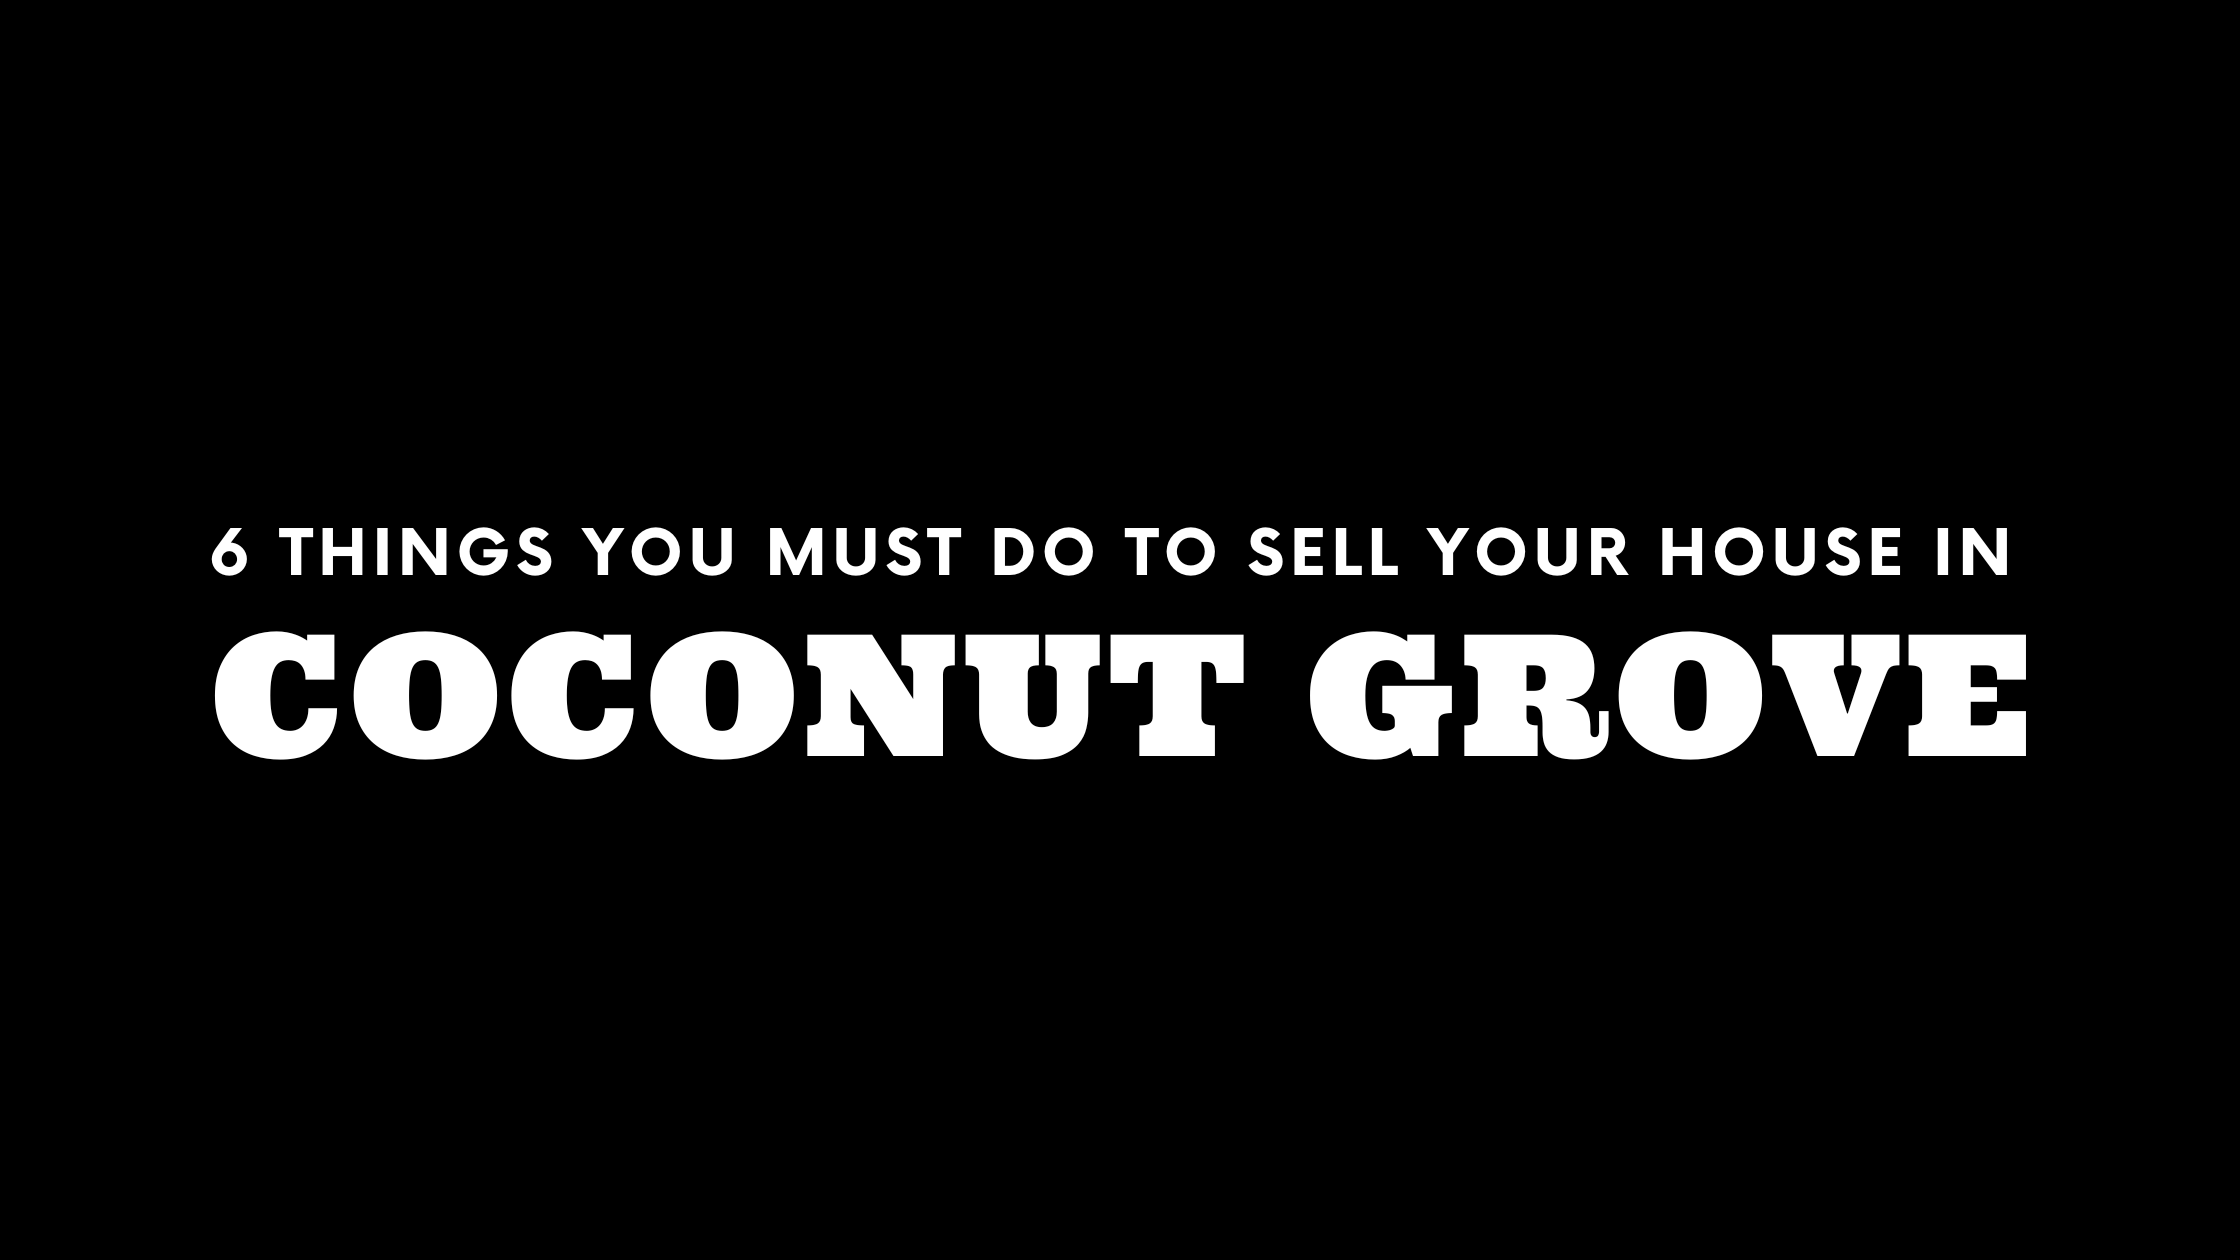 Selling Your House in Coconut Grove? 6 Things You MUST Do!